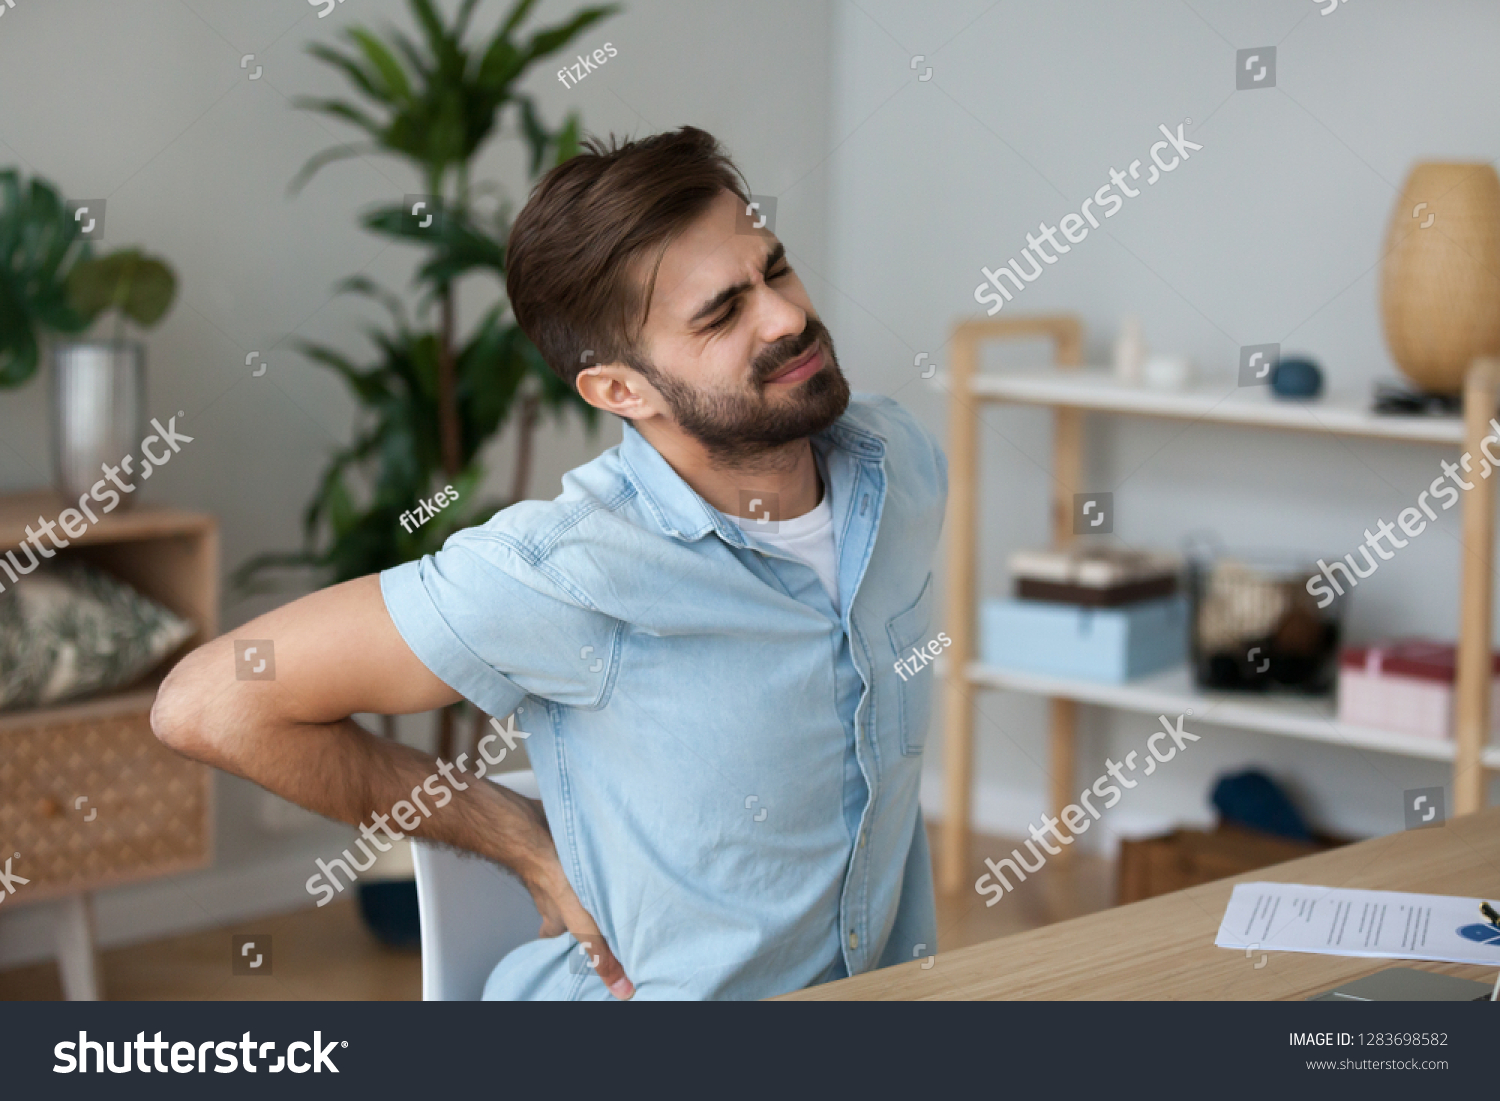 Tired exhausted man feeling pain in back suffering from lower lumbar backache herniated disc after sedentary work, fatigued man rubbing spine muscles sitting in incorrect posture, backpain concept #1283698582